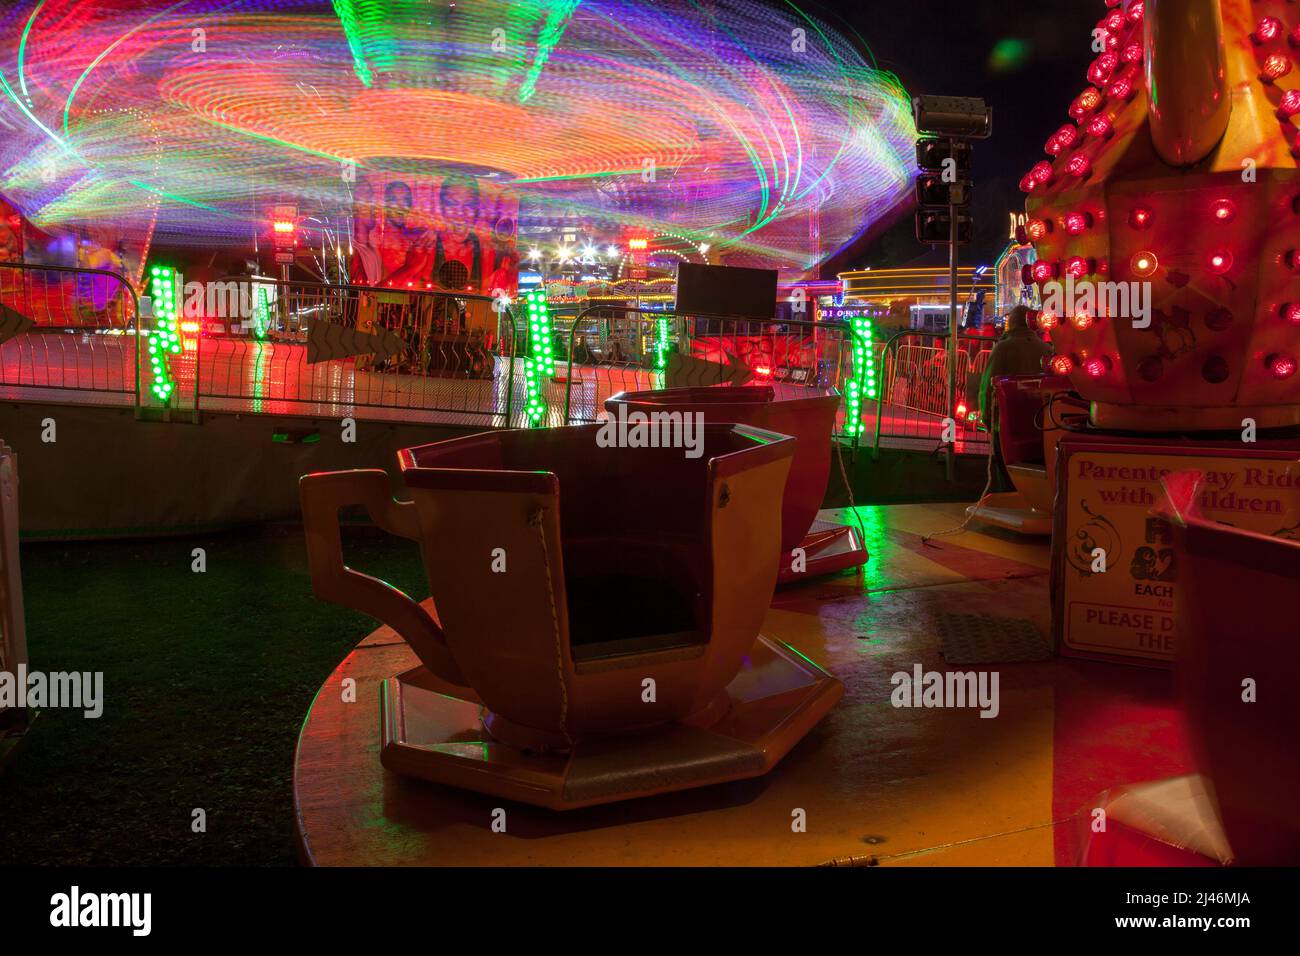 Long exposure images of the fairground rides at Oxford's St Giles travelling funfair held annually in September. Stock Photo